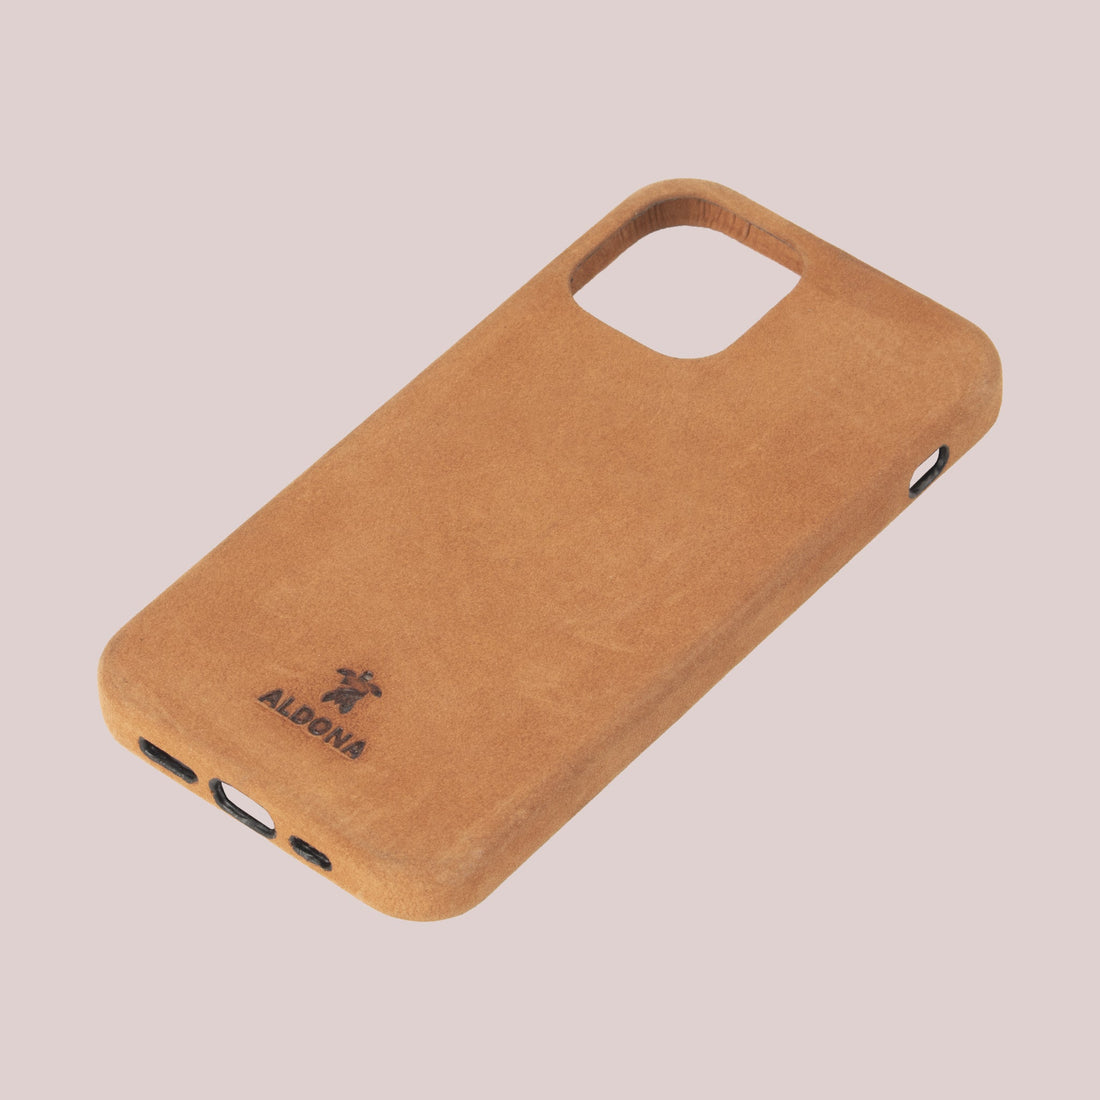 Kalon Case for iPhone 12 Pro with MagSafe Compatibility - Burnt Tobacco